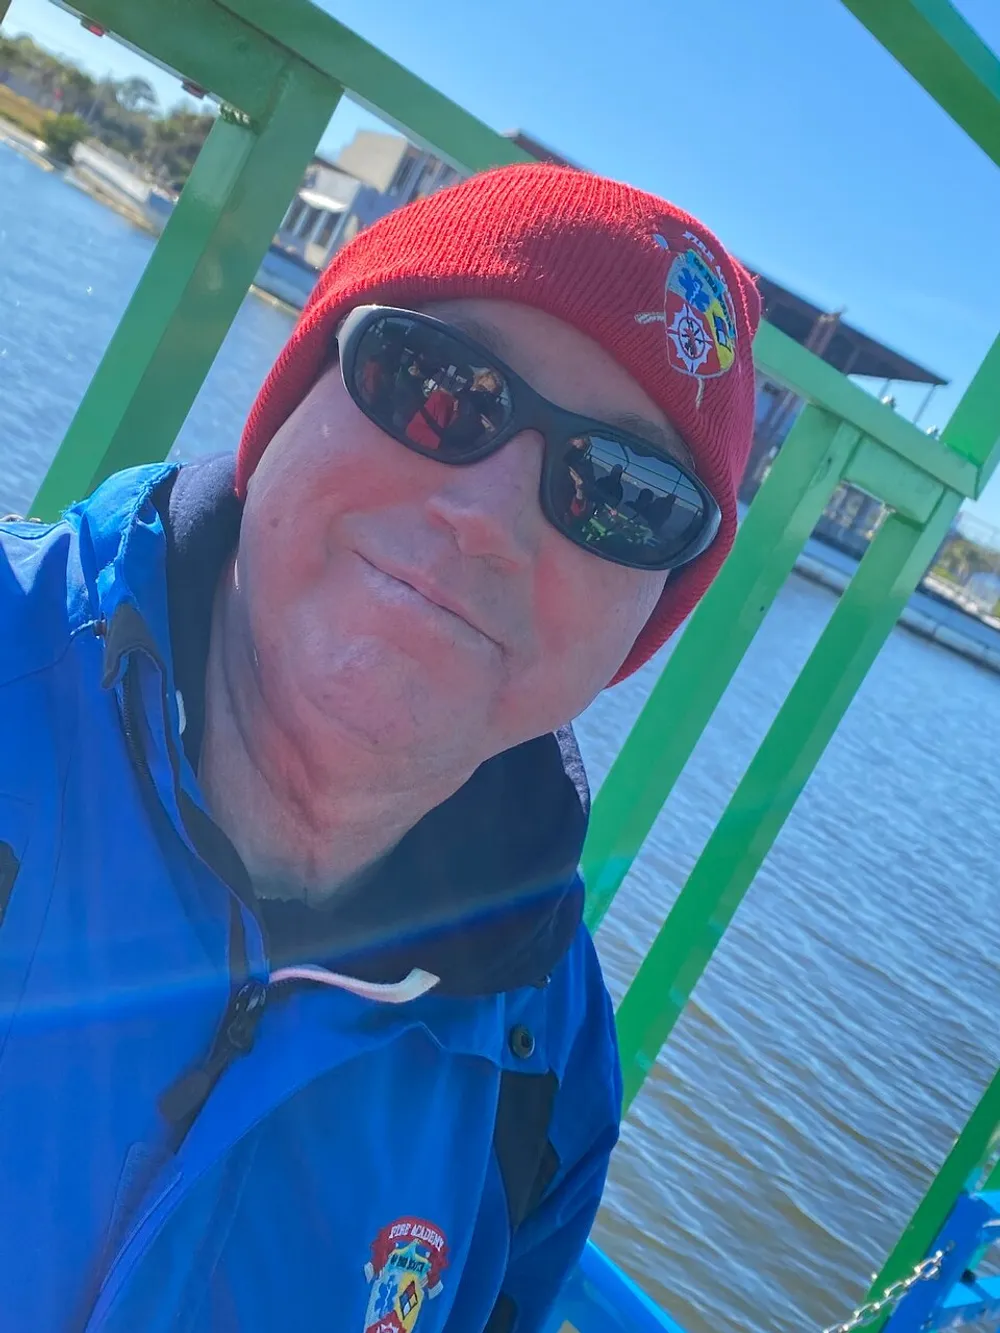 A person in a blue jacket and red beanie is smiling while wearing sunglasses near a green structure with a water backdrop